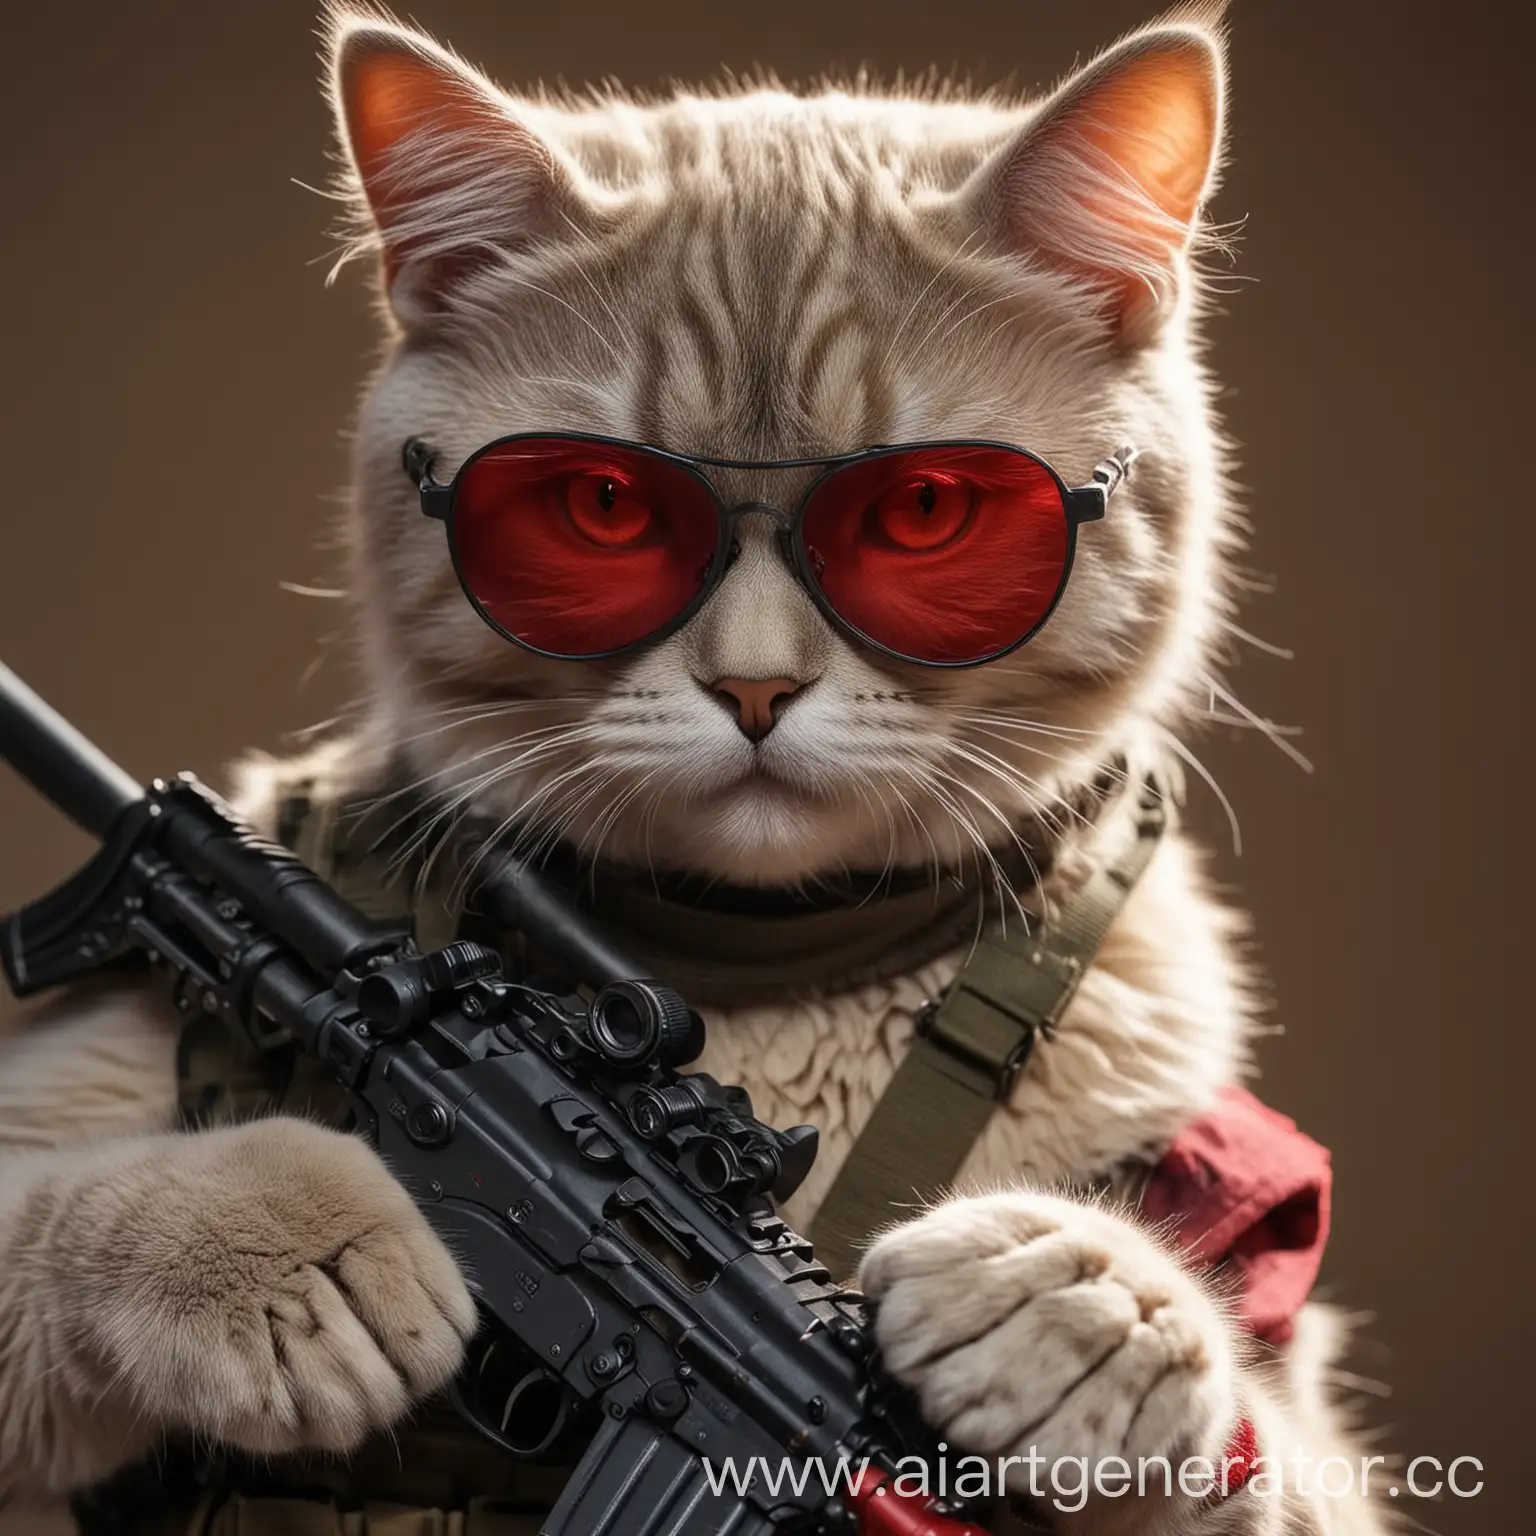 Cat-Holding-AK47-with-Red-Lens-Glasses